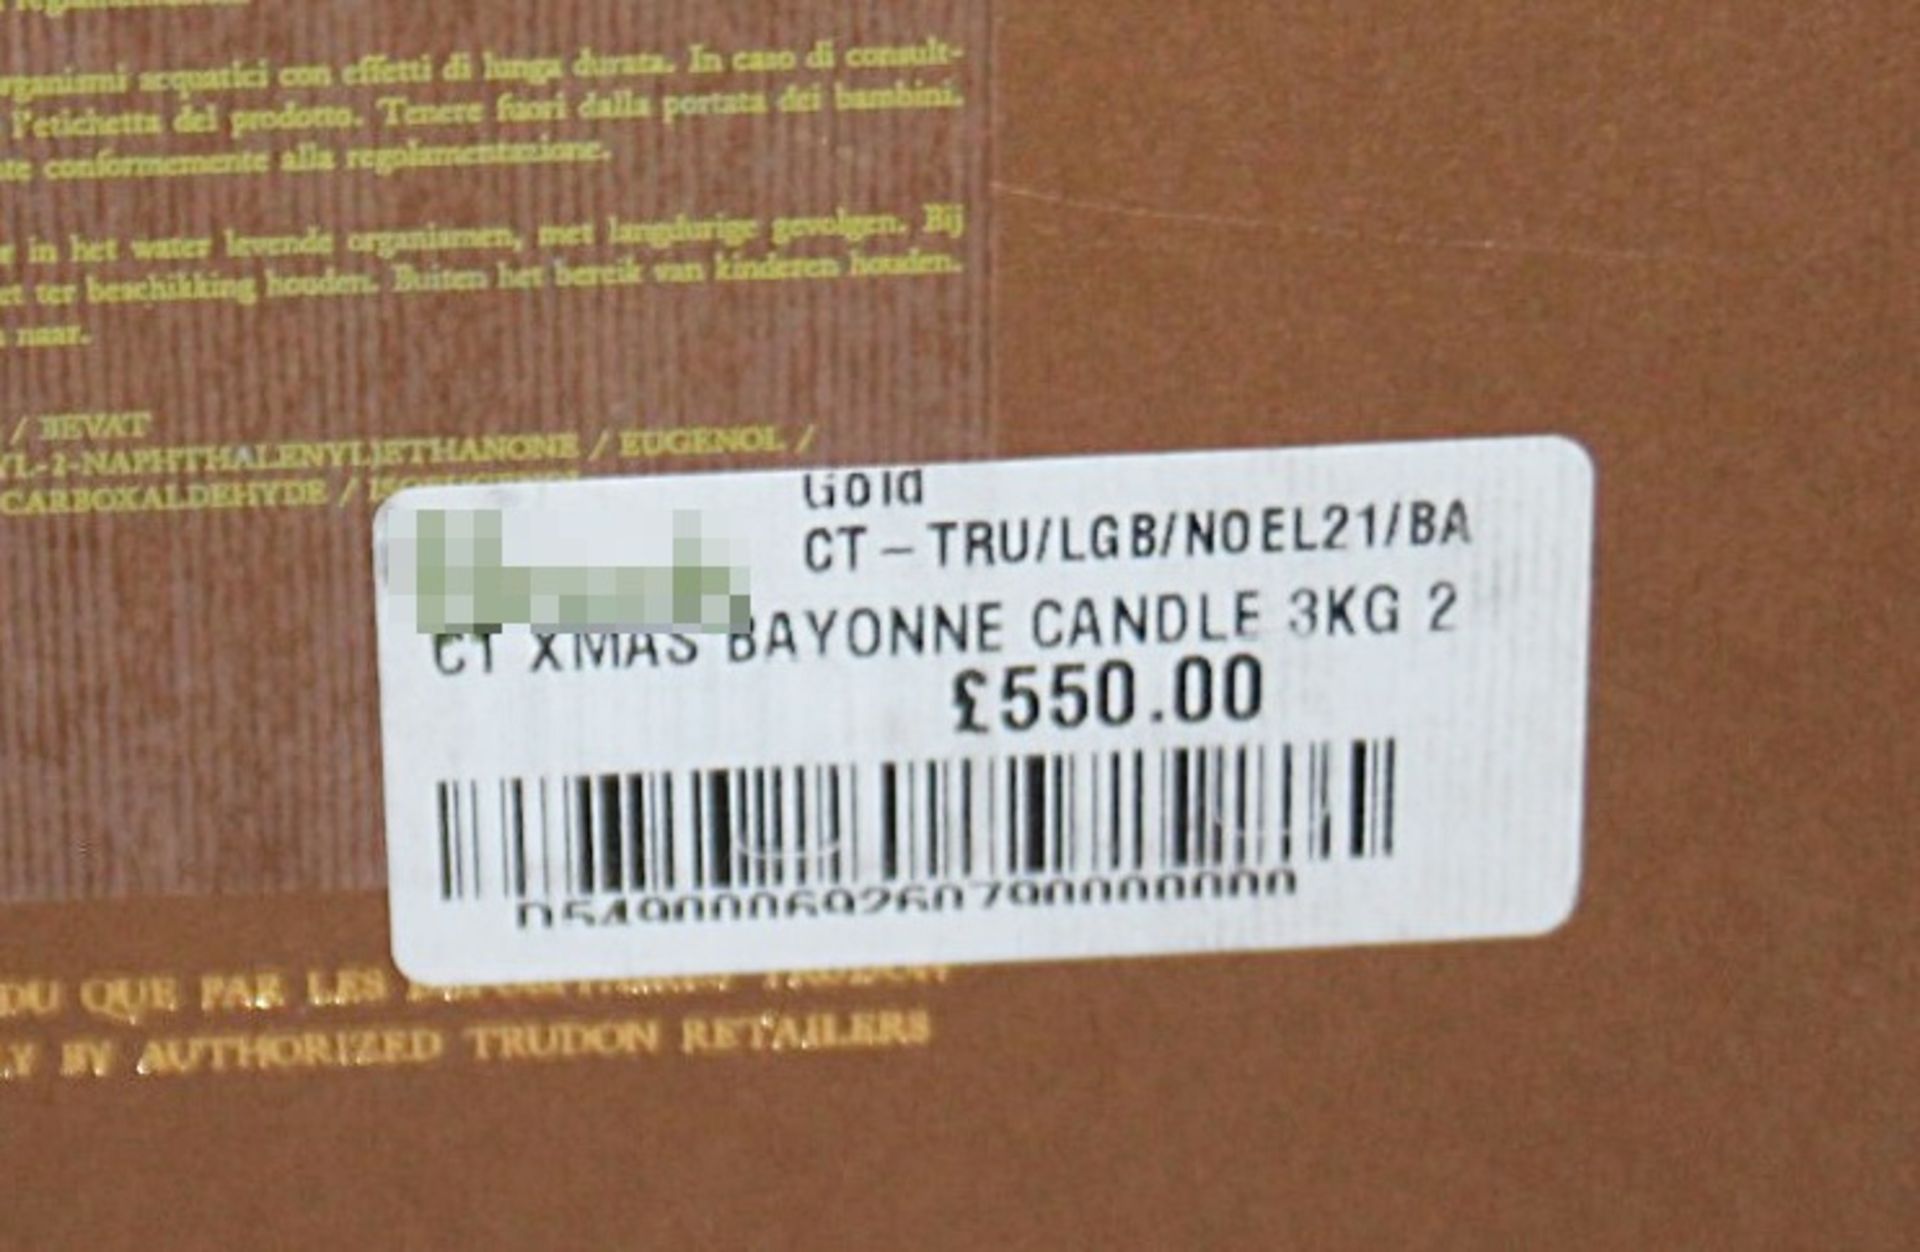 1 x CIRE TRUDON Christmas Bayonne Great Candle (3kg) - Original Price £550.00 - Unused Boxed Stock - - Image 5 of 8